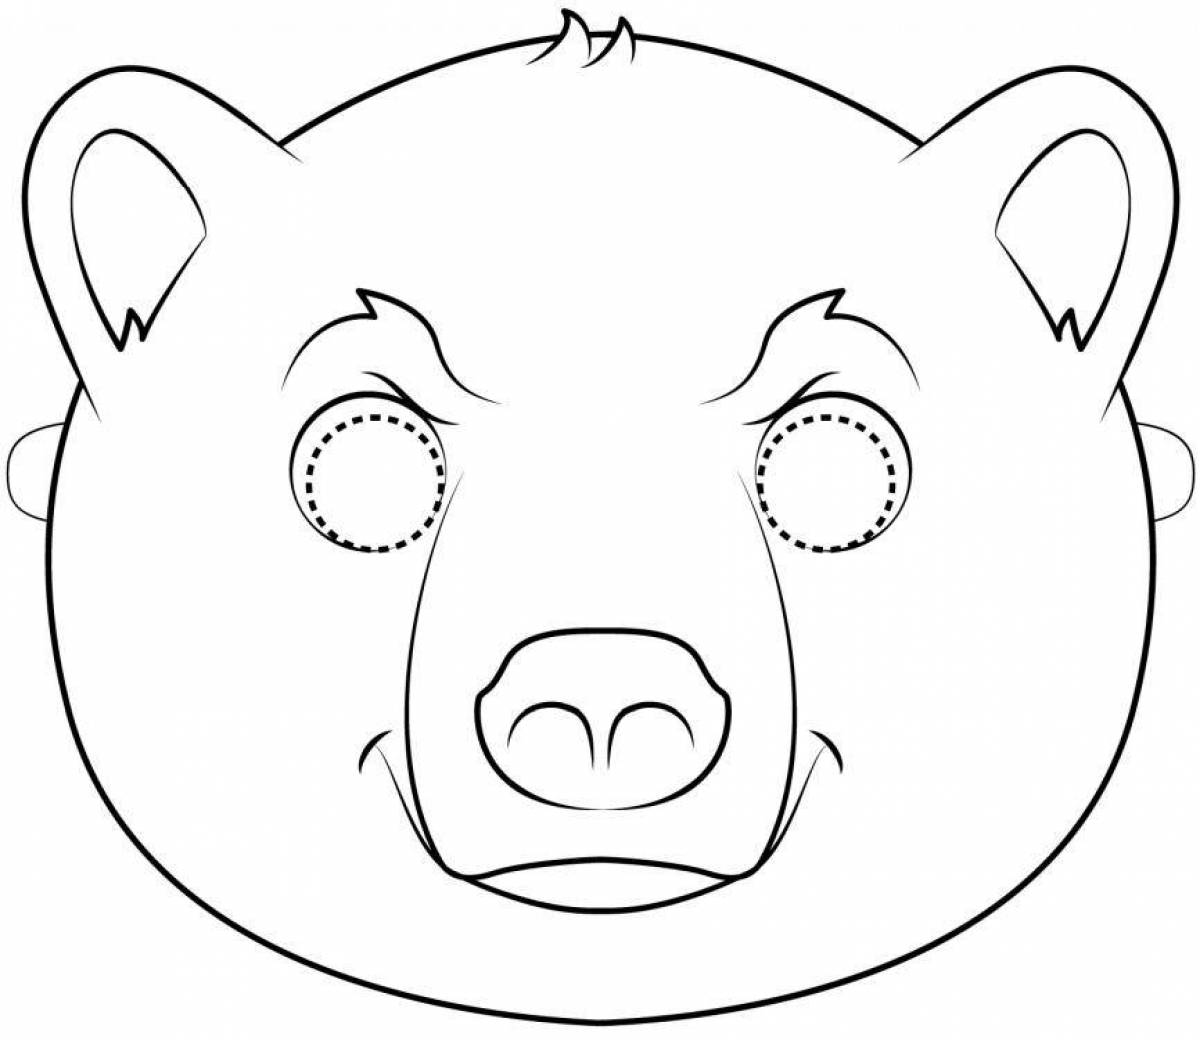 Coloring page happy bear mask